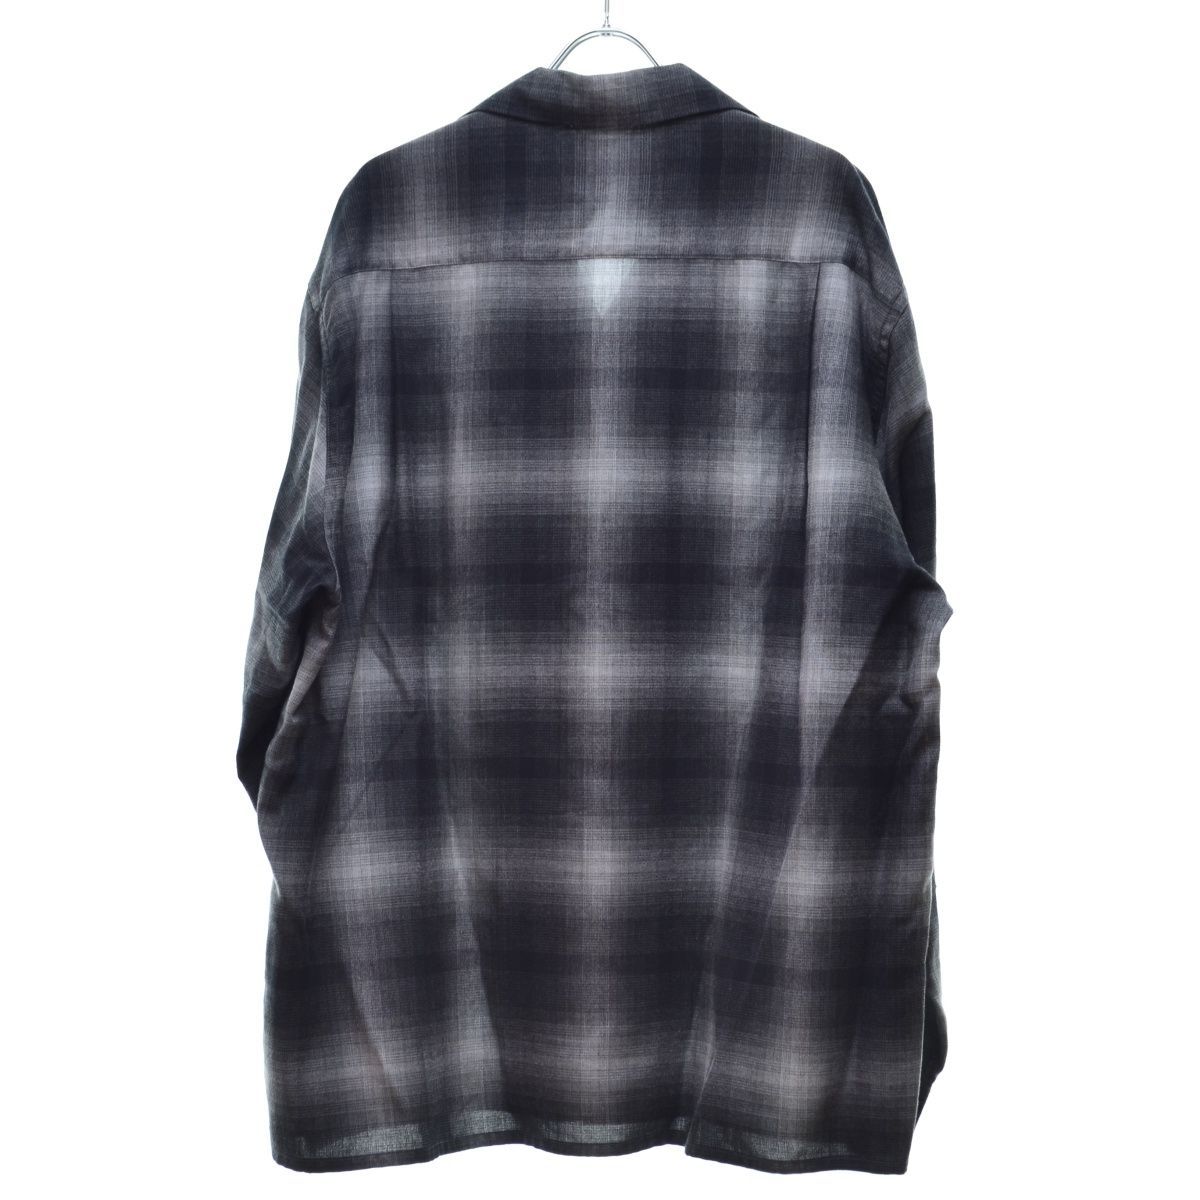 L【WACKO MARIA / ワコマリア】23AW OMBRE CHECK OPEN COLLAR SHIRT L/S ( TYPE-3 )  オンブレチェック長袖シャツ